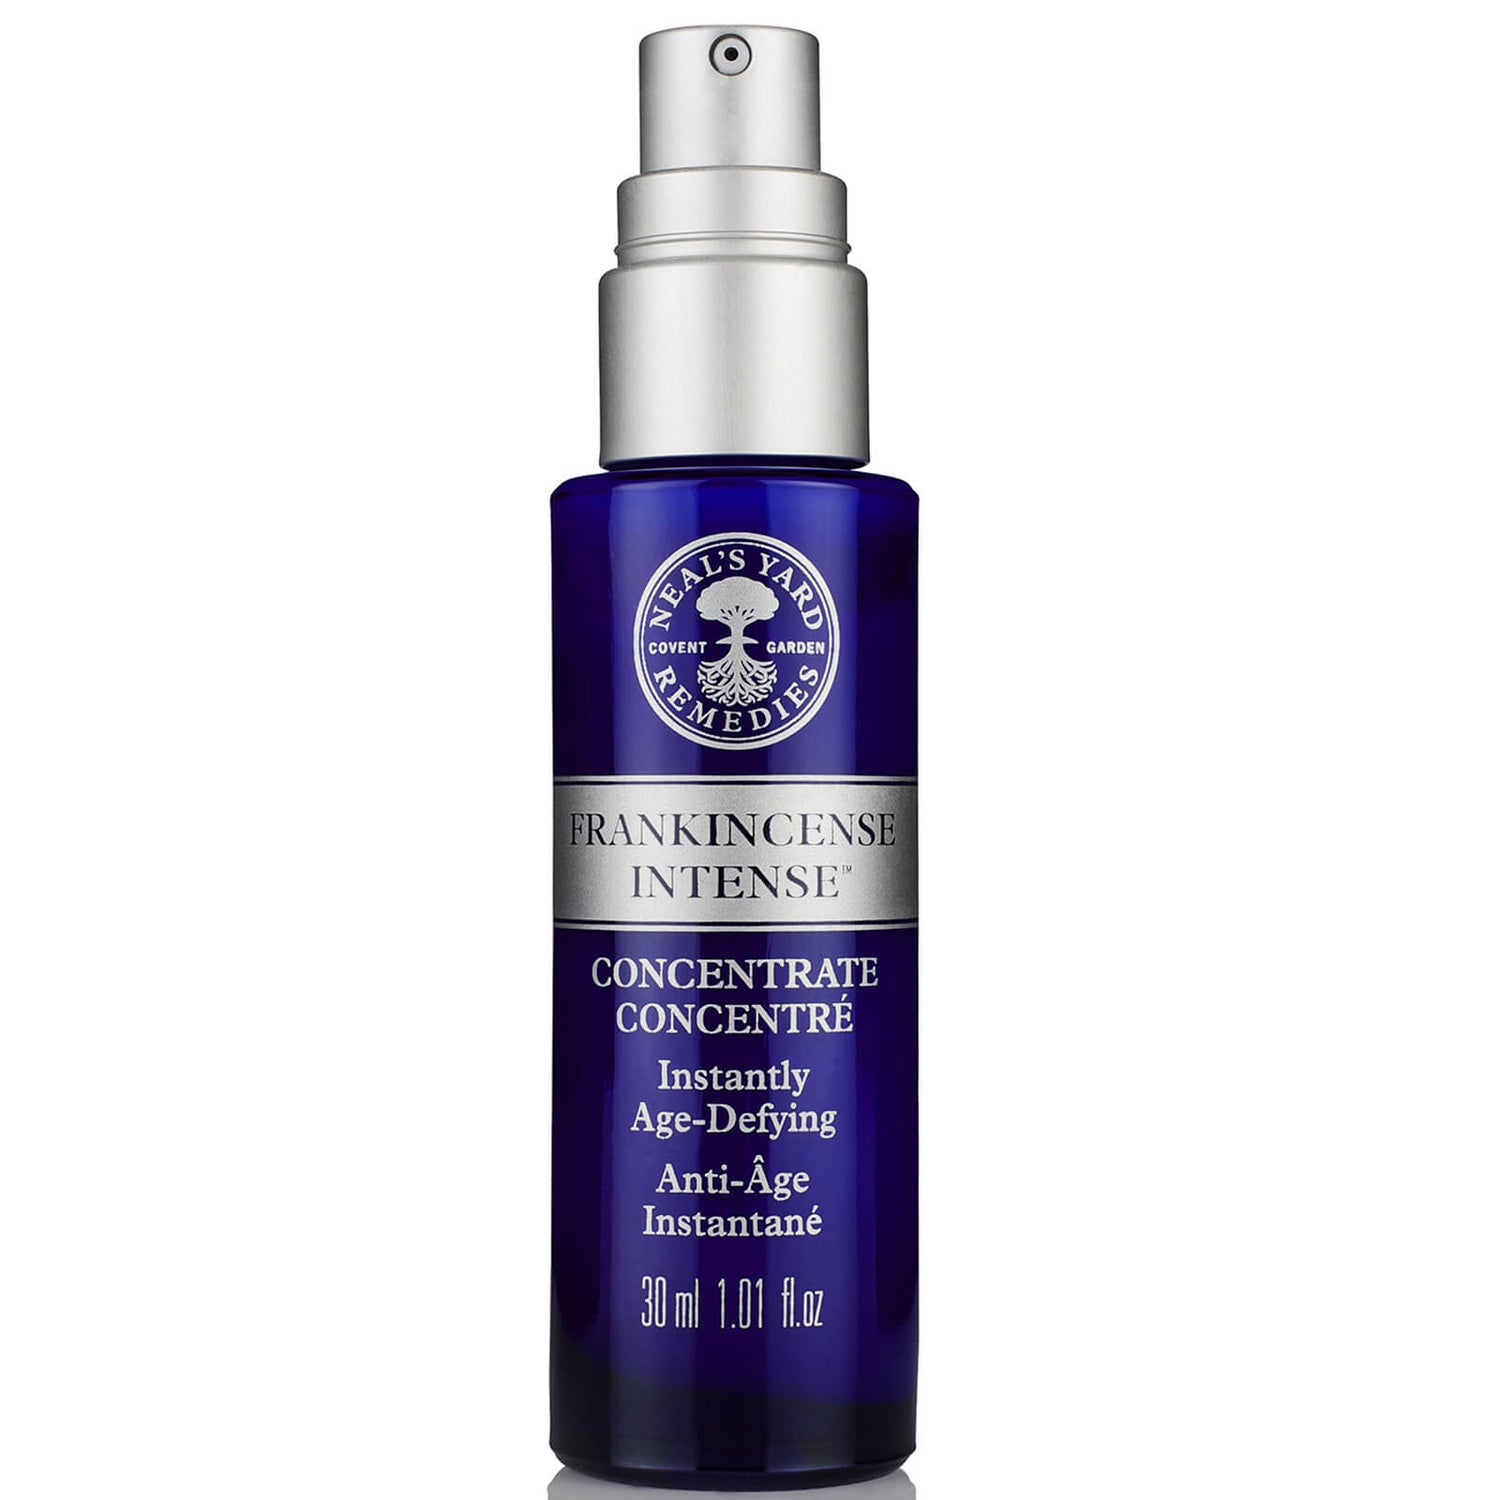 Neal's Yard Remedies Frankincense Intense Concentrate 30ml